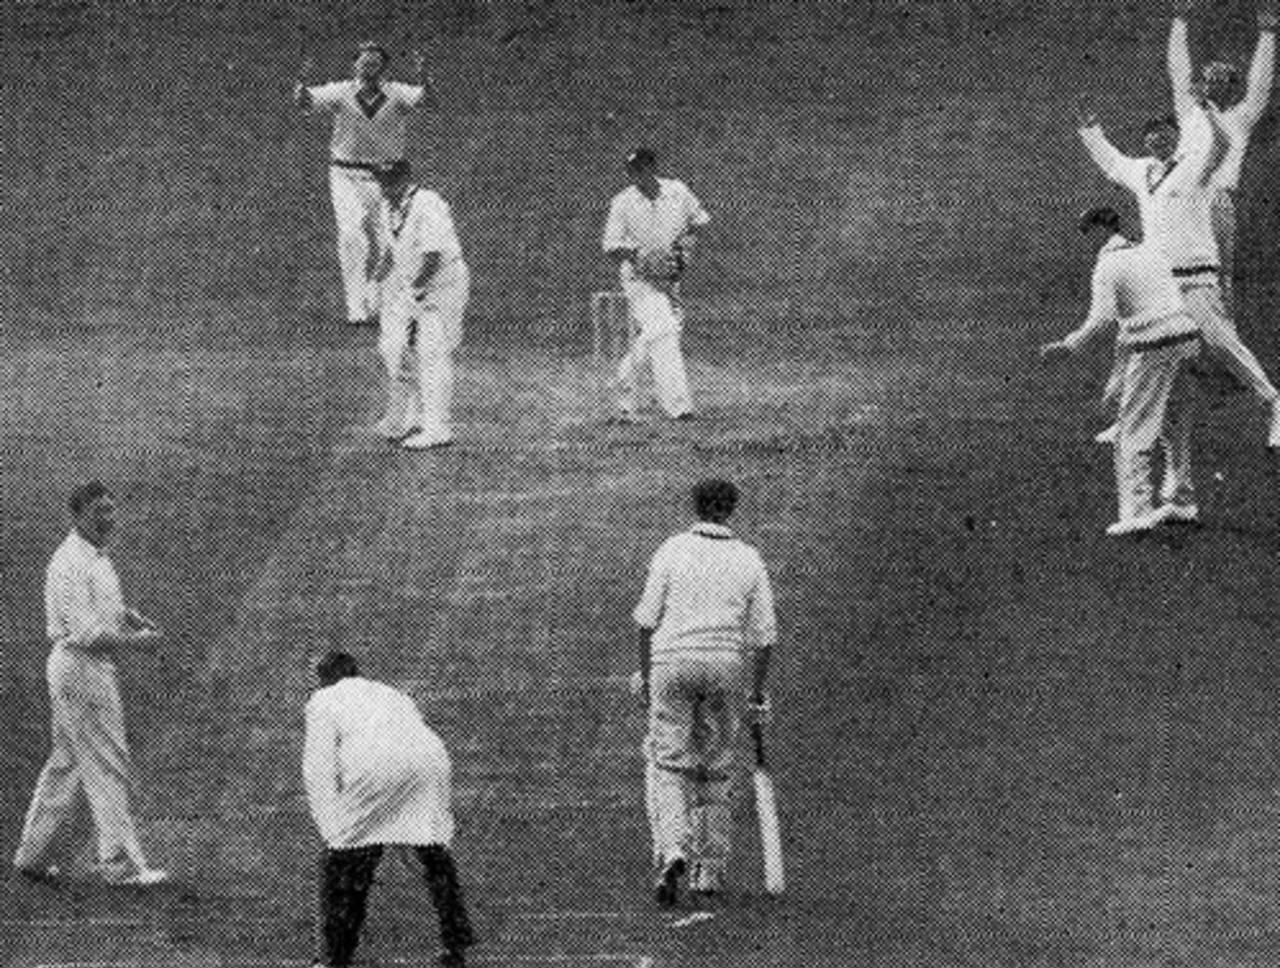 Jim Laker takes his tenth wicket as Jack Wilson is caught by Roy Swetman&nbsp;&nbsp;&bull;&nbsp;&nbsp;The Cricketer International